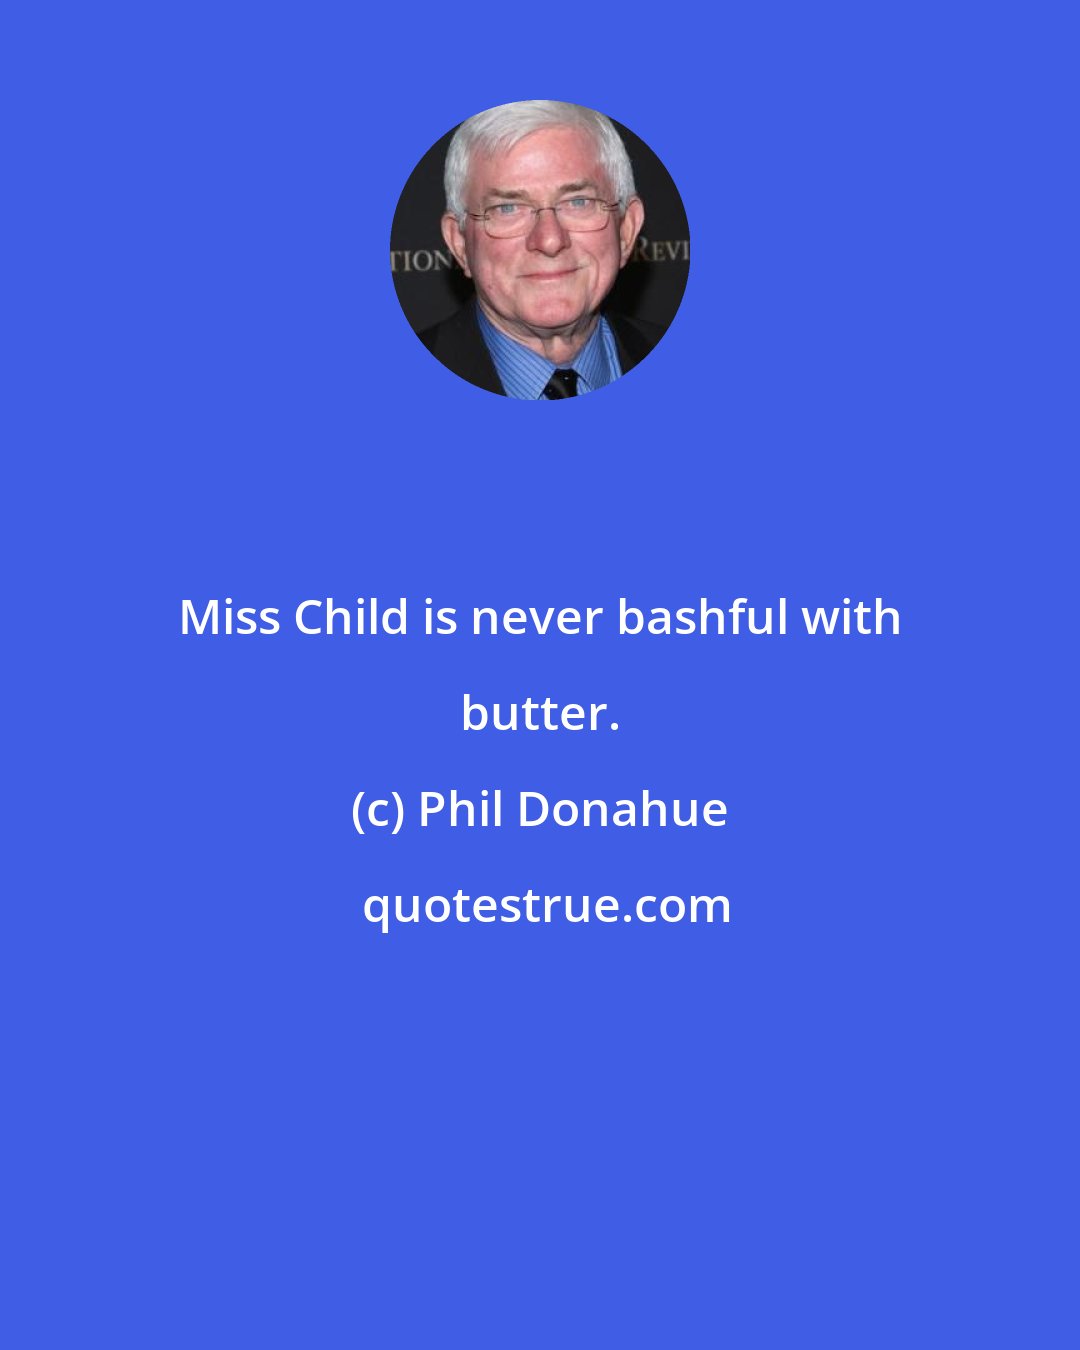 Phil Donahue: Miss Child is never bashful with butter.